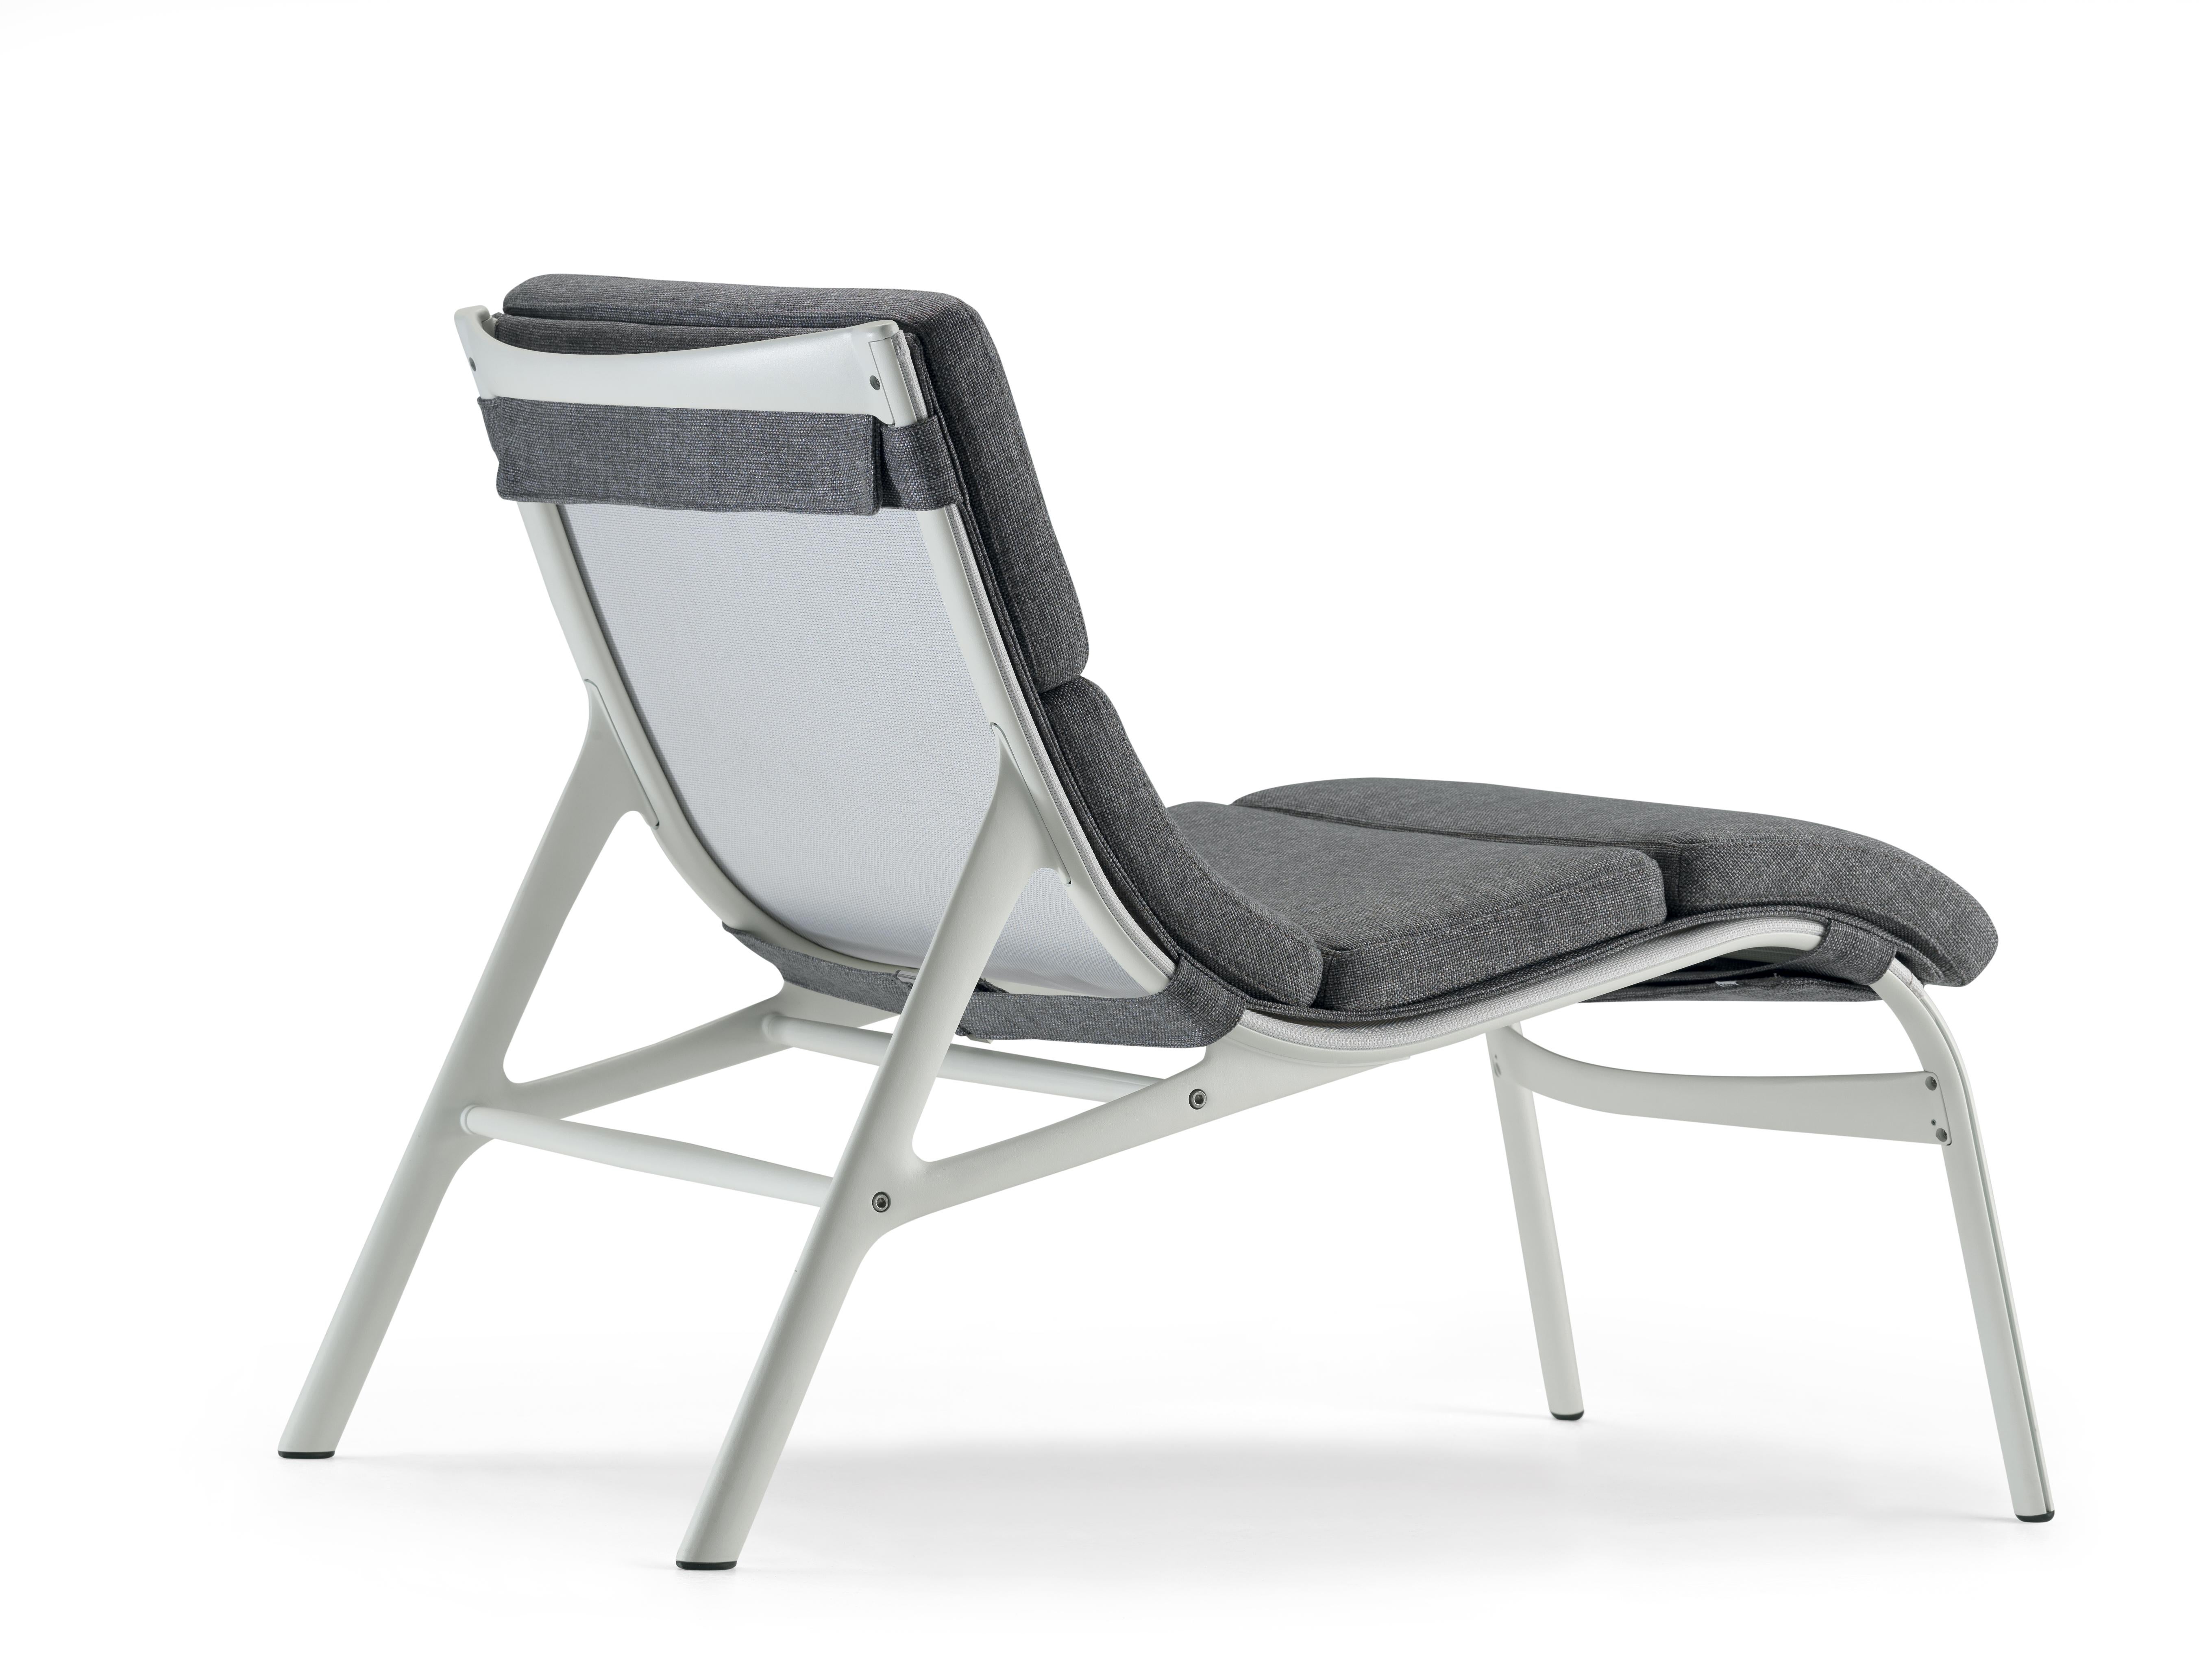 Alias 462 Armframe Soft Chair in White Mesh & Grey Seat with Lacquered Frame by Alberto Meda

Easy chair with structure made of extruded aluminium profile and die-cast aluminium elements. Seat and back upholstered with cover in eco-leather Serge